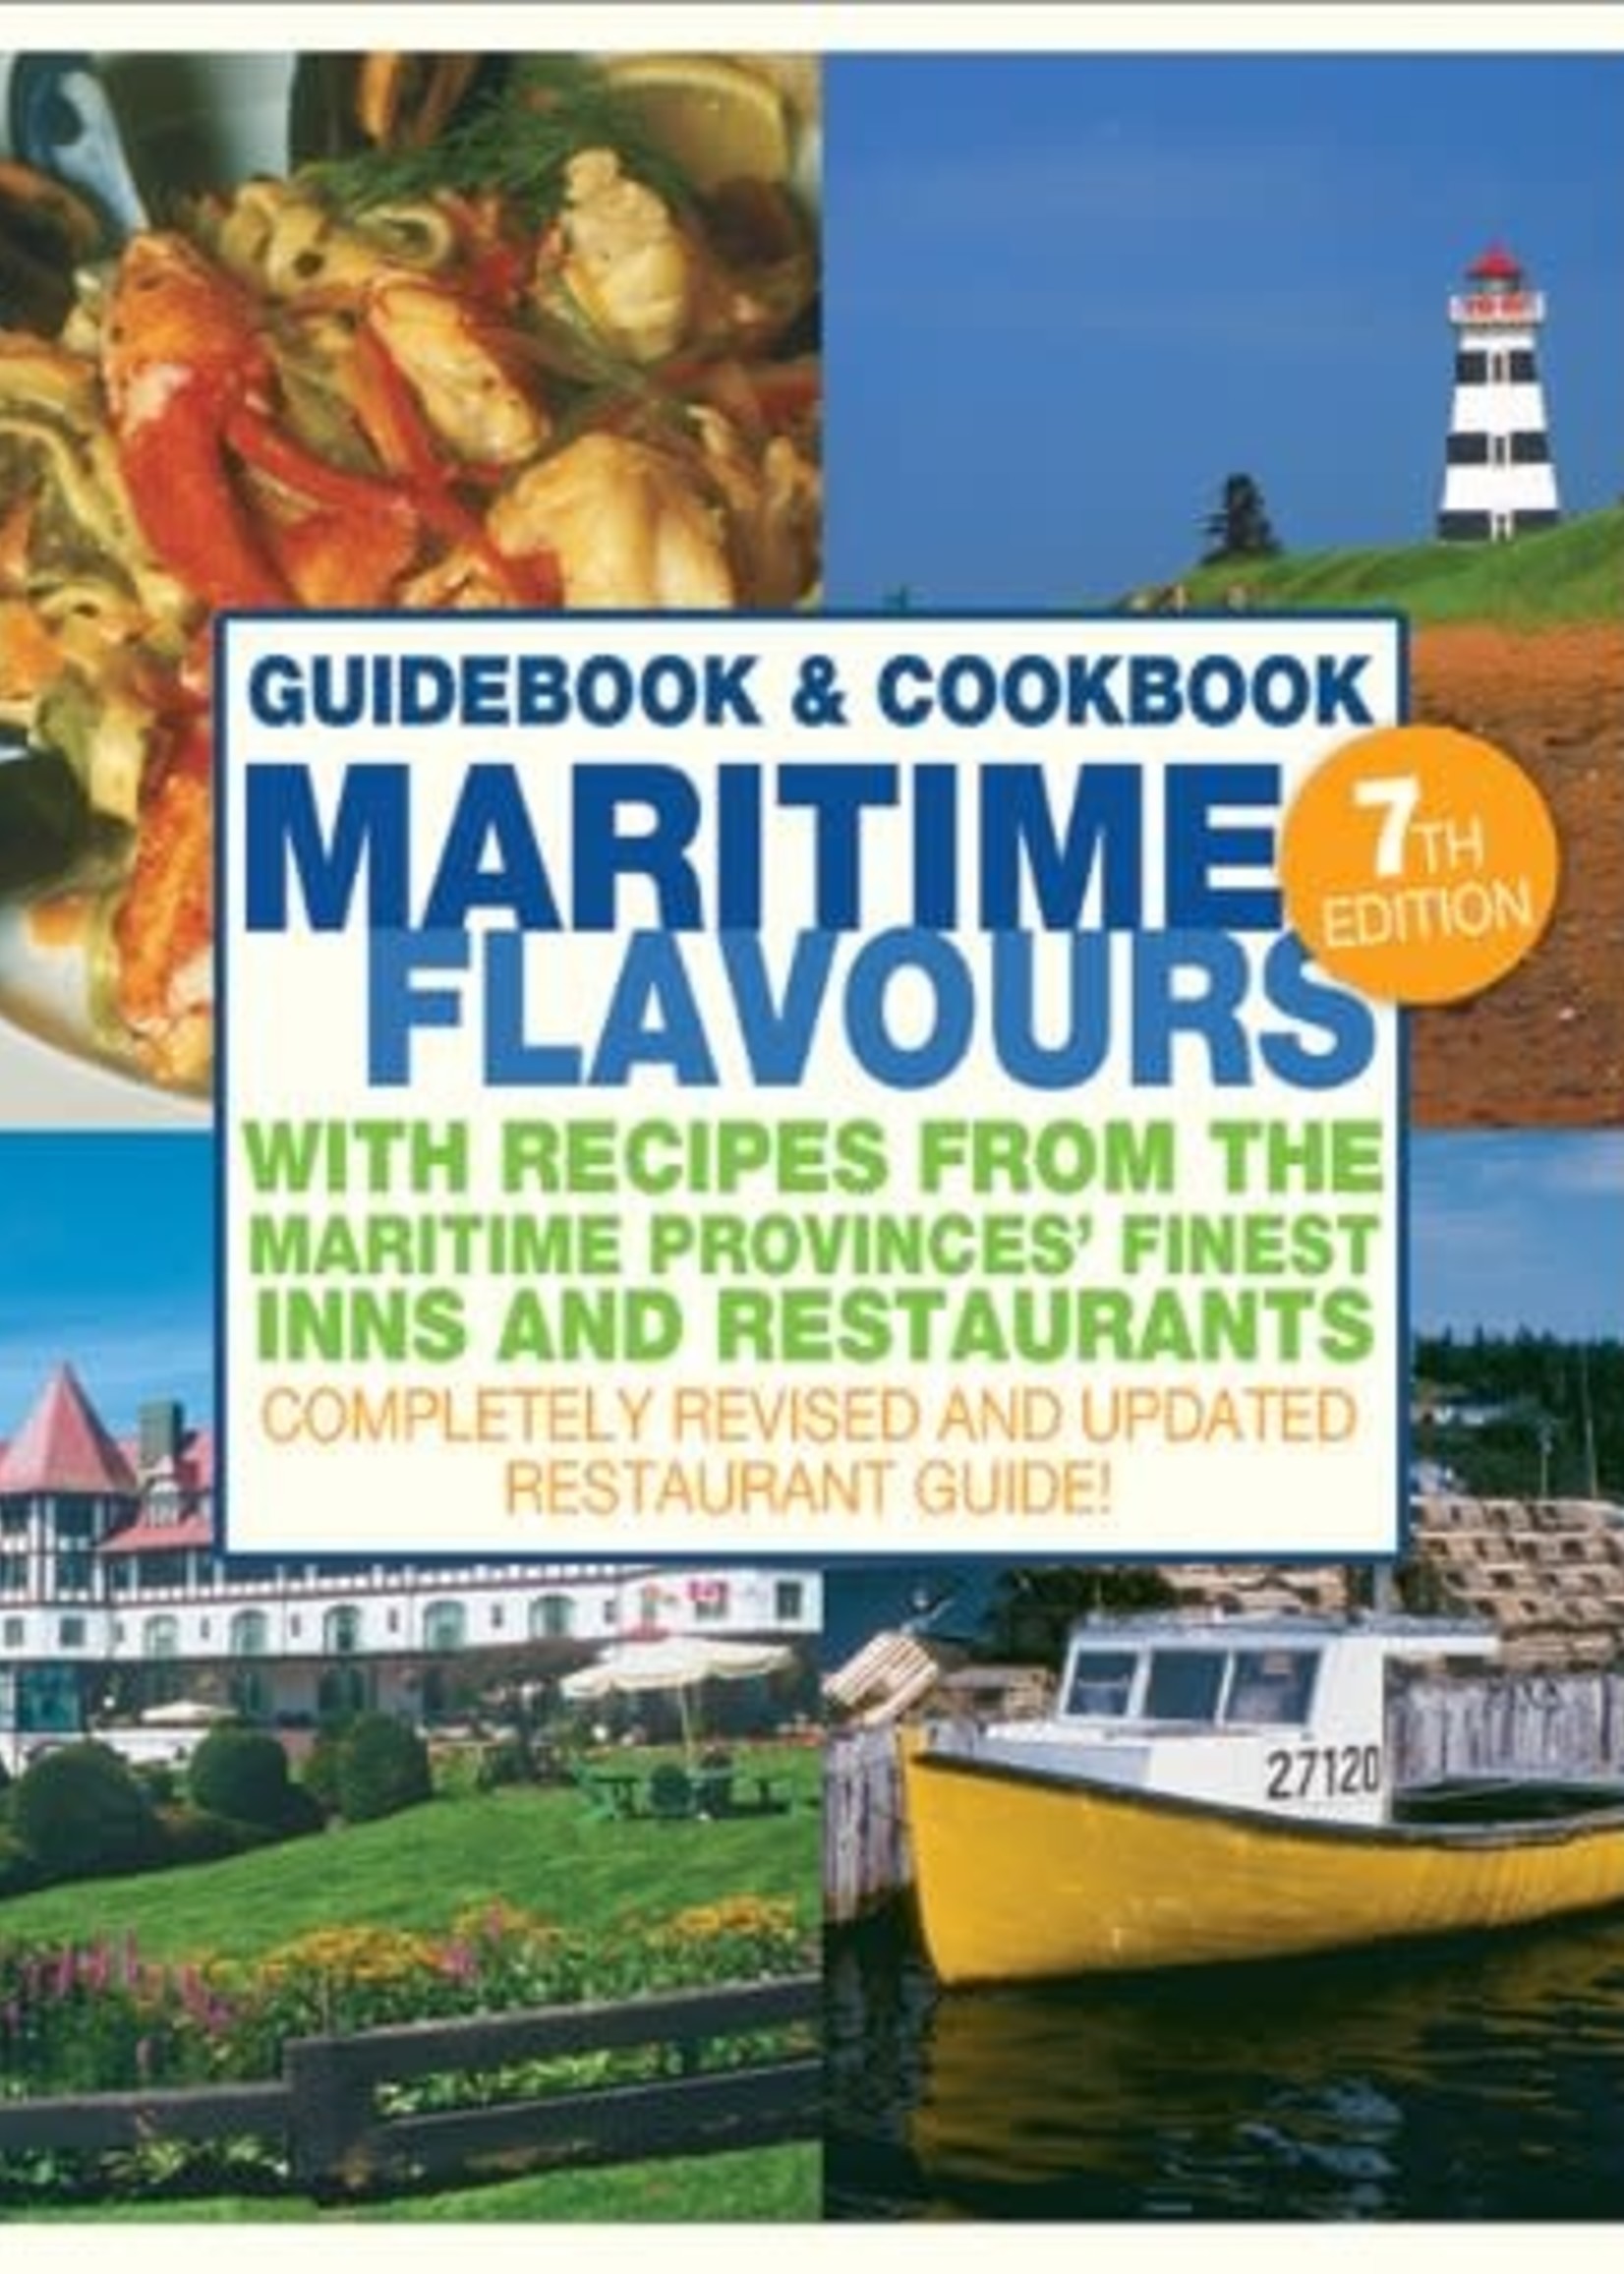 Maritime Flavours Guidebook and Cookbook, 7th Edition By Elaine Elliot and Virginia Lee, Photographs by Vaughan, Keith